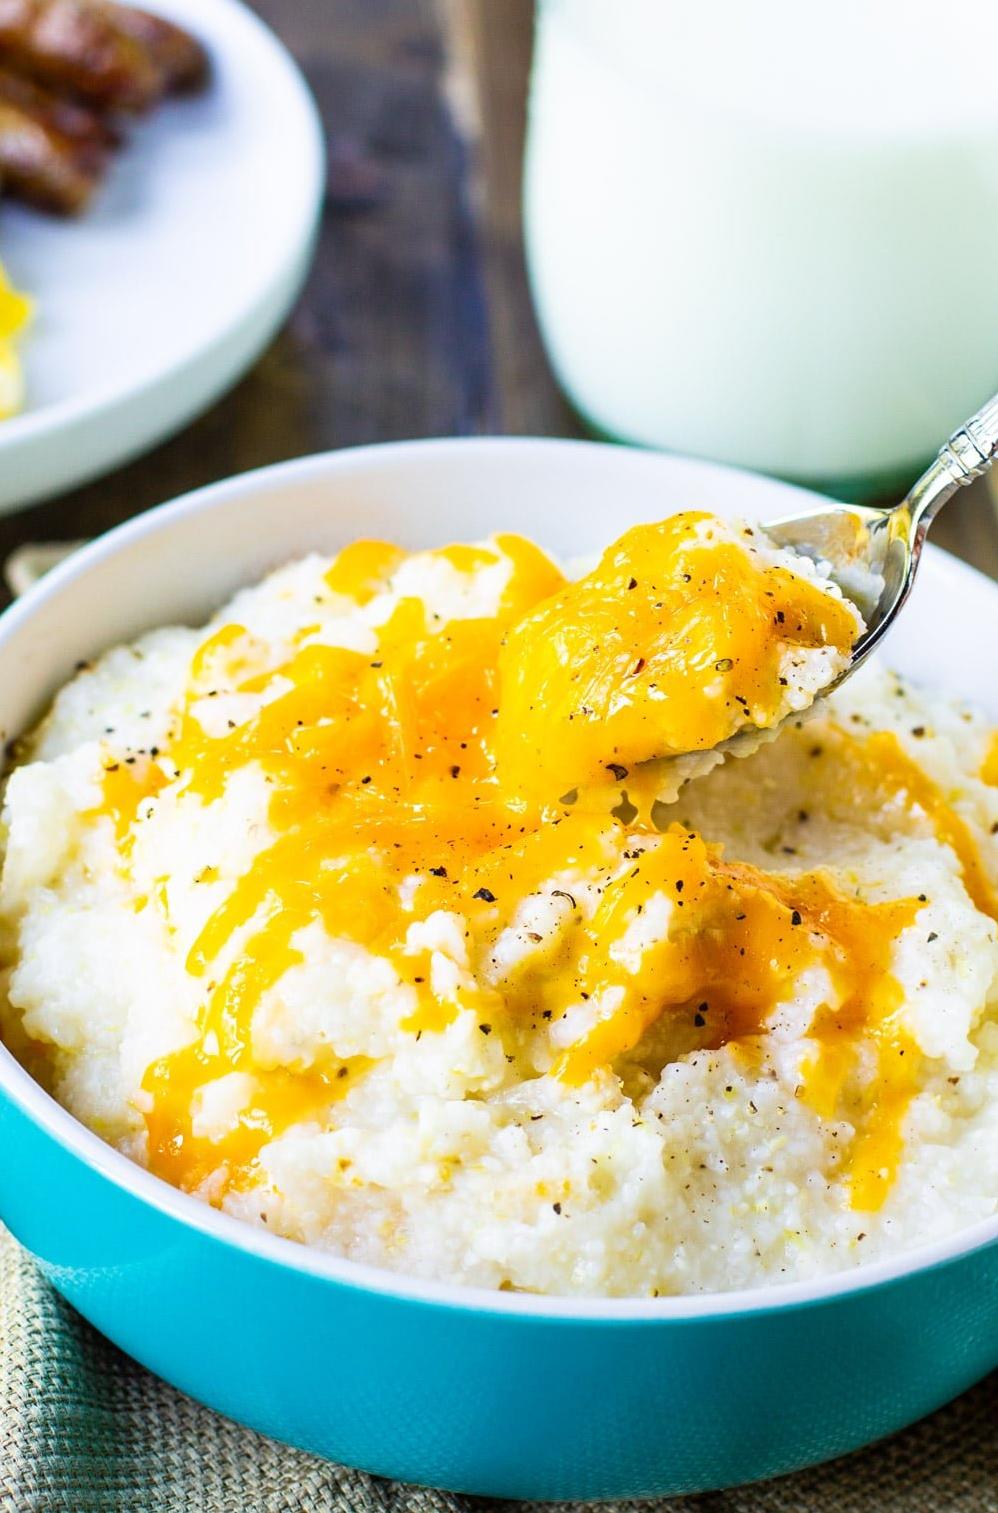  You can never go wrong with grits, especially these loaded cheesy grits.